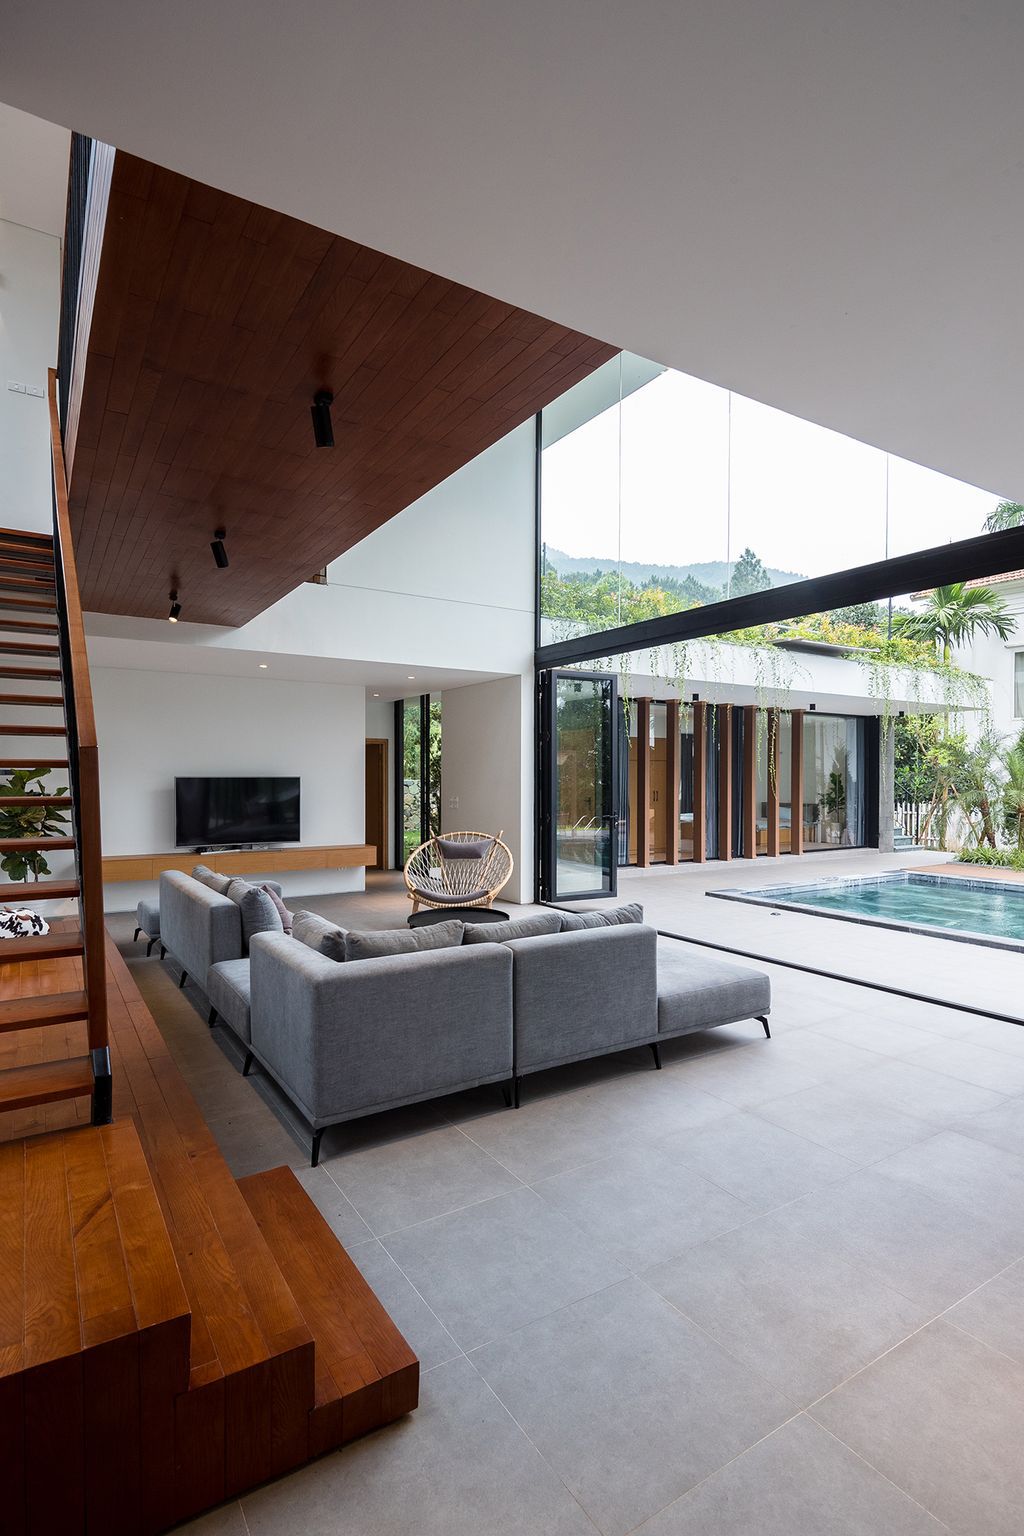 U-Space Villa Tam Dao, a Nature-Integrated Retreat by Idee Architects